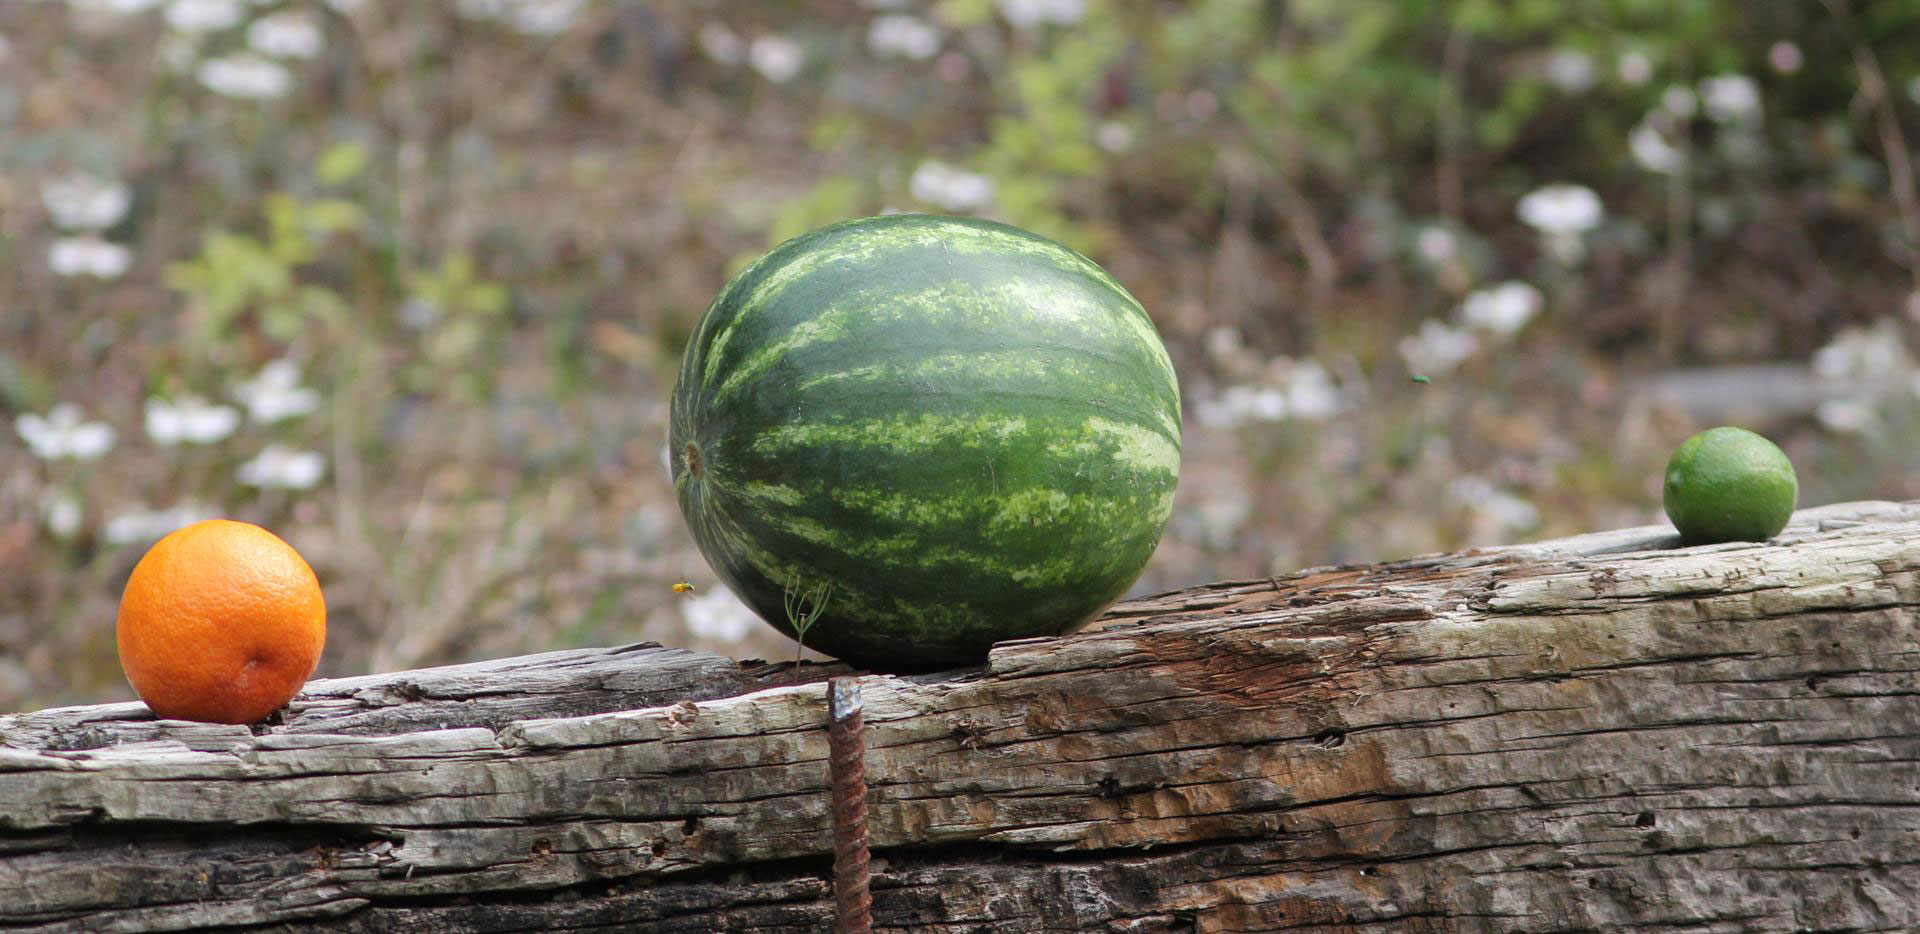 Watermelons are a favorite for casual bullet testing sessions.